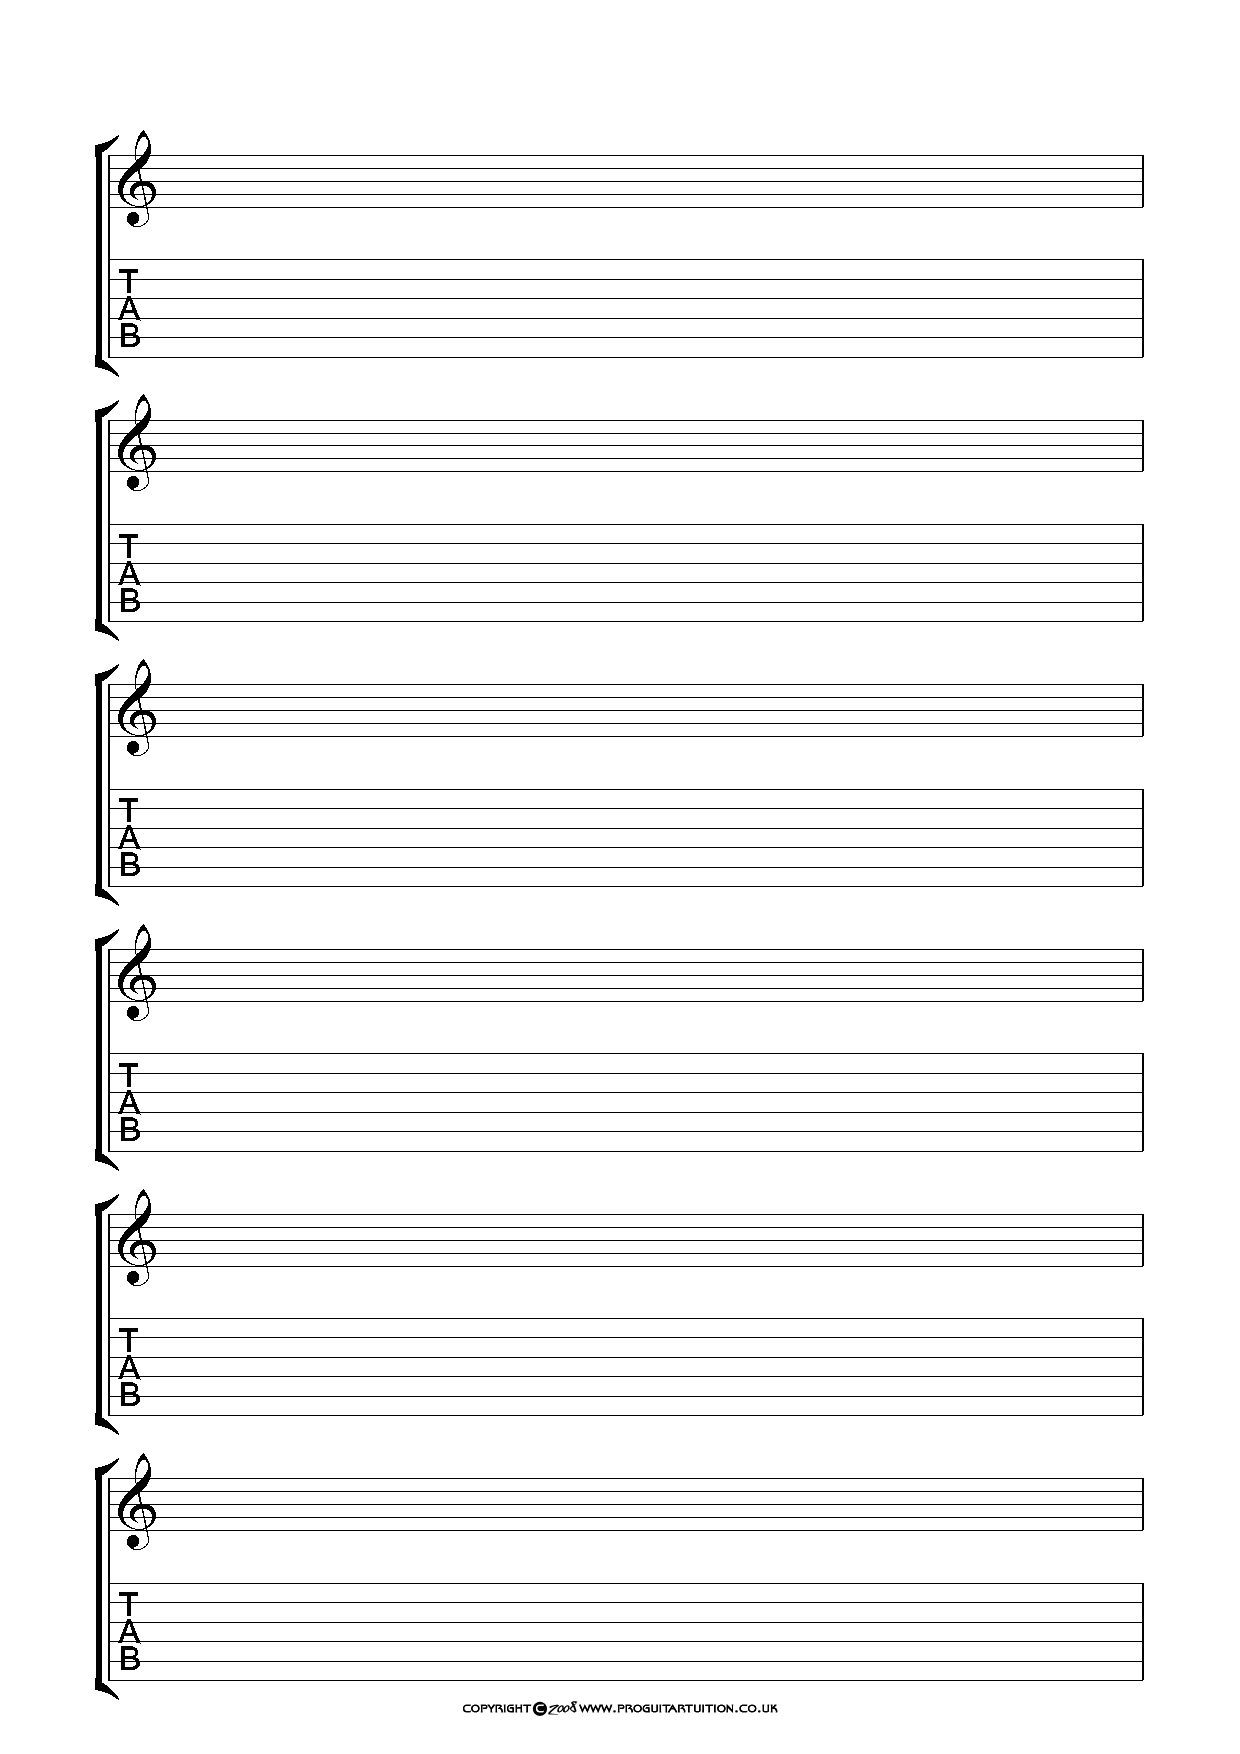 Blank Tab Sheets For Guitar Pictures to pin on Pinterest